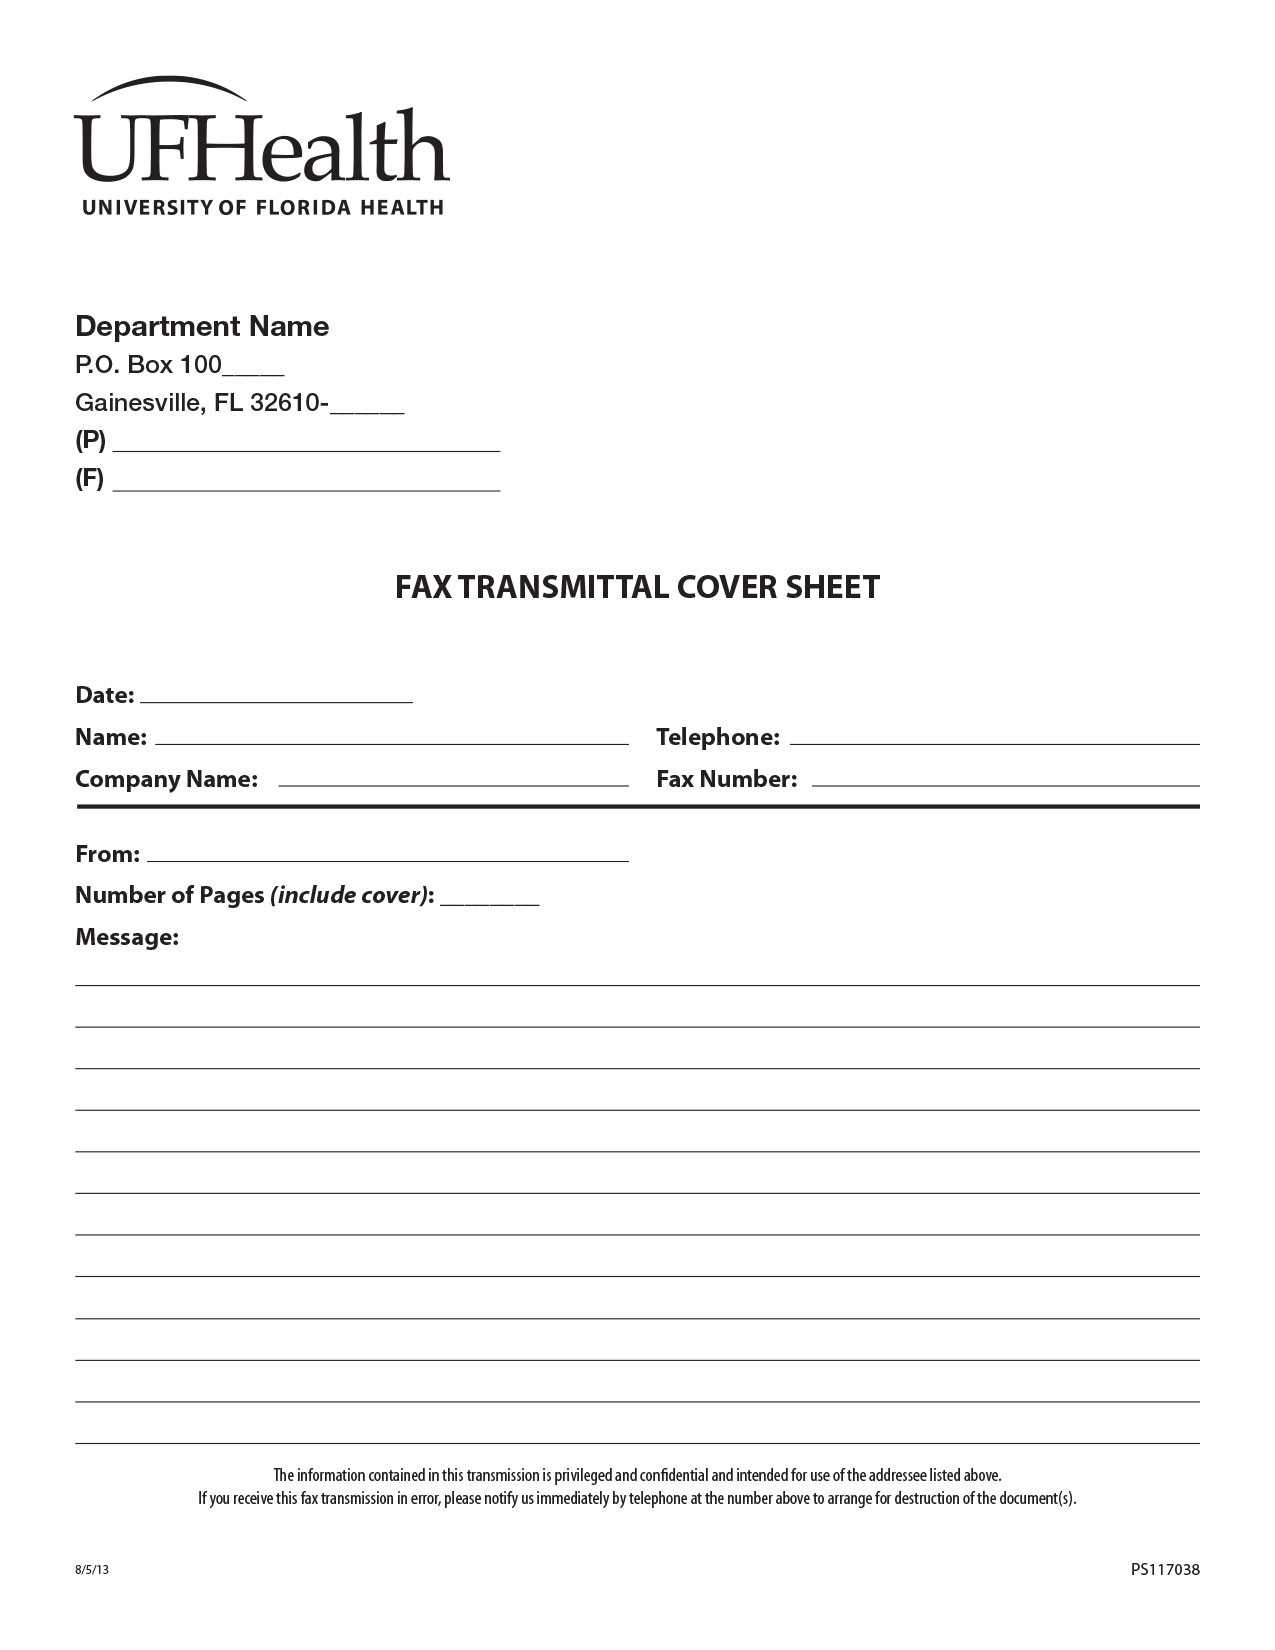 10 Printable Fax Cover Sheet Templates | Proposal Sample Within Fax Template Word 2010